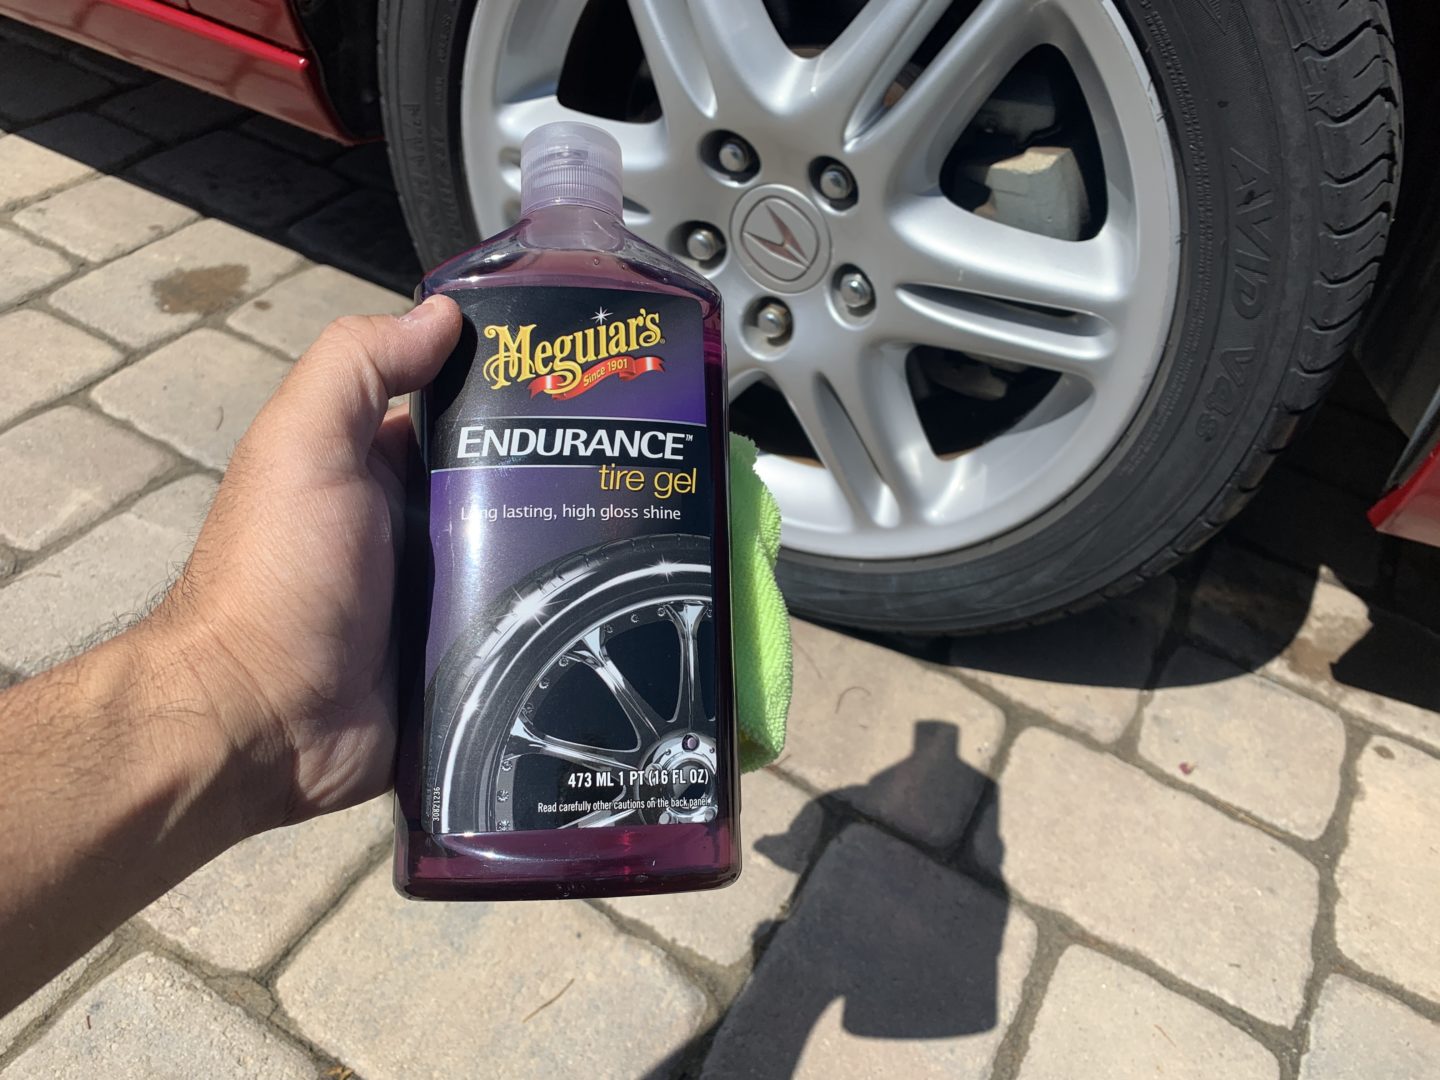 Meguiar's - Never used Endurance Tire Gel? Here's why you should! .  🍇Advanced polymers provide lasting, high gloss protection. 🍇Protects  against UV damage and browning. 🍇The rich gel allows for full control